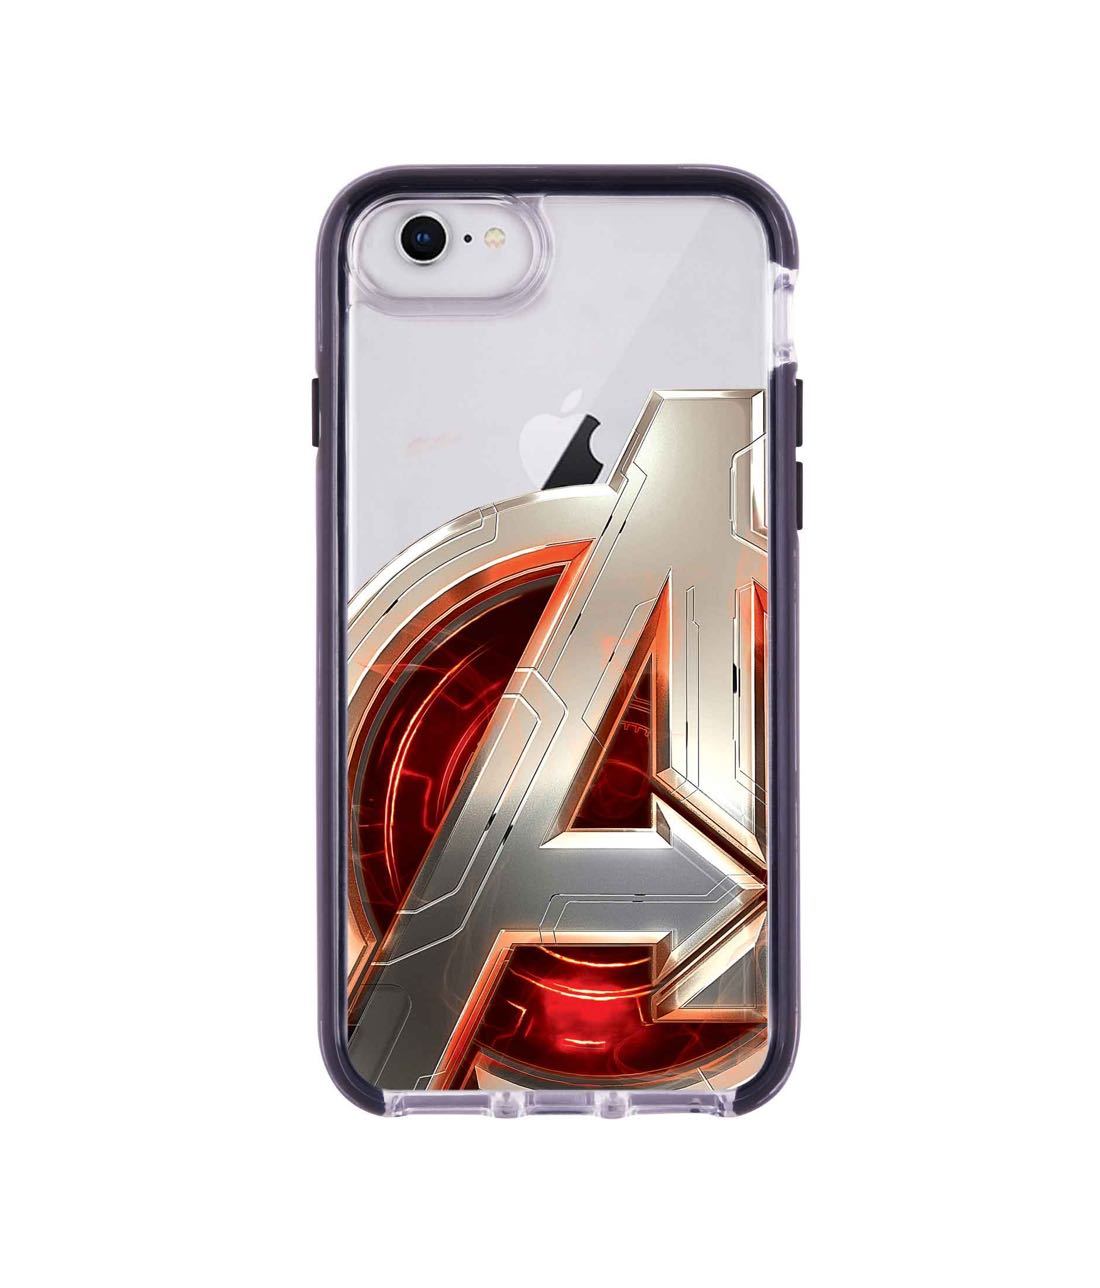 Avengers Version 2 - Extreme Phone Case for iPhone SE (2020)